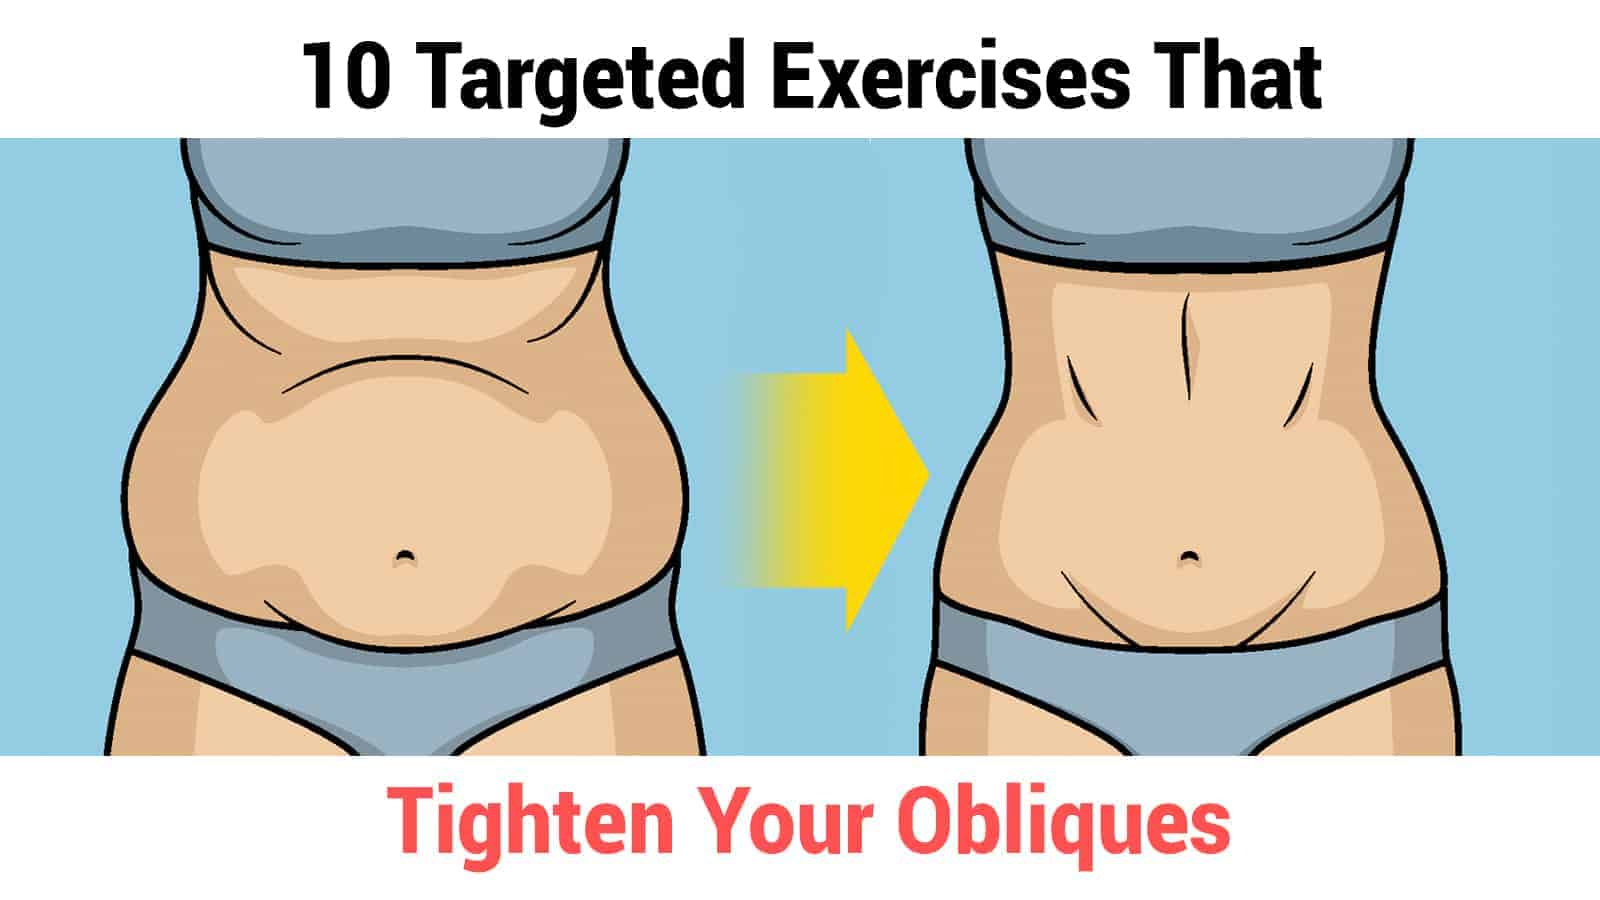 10 Targeted Exercises That Tighten Your Obliques